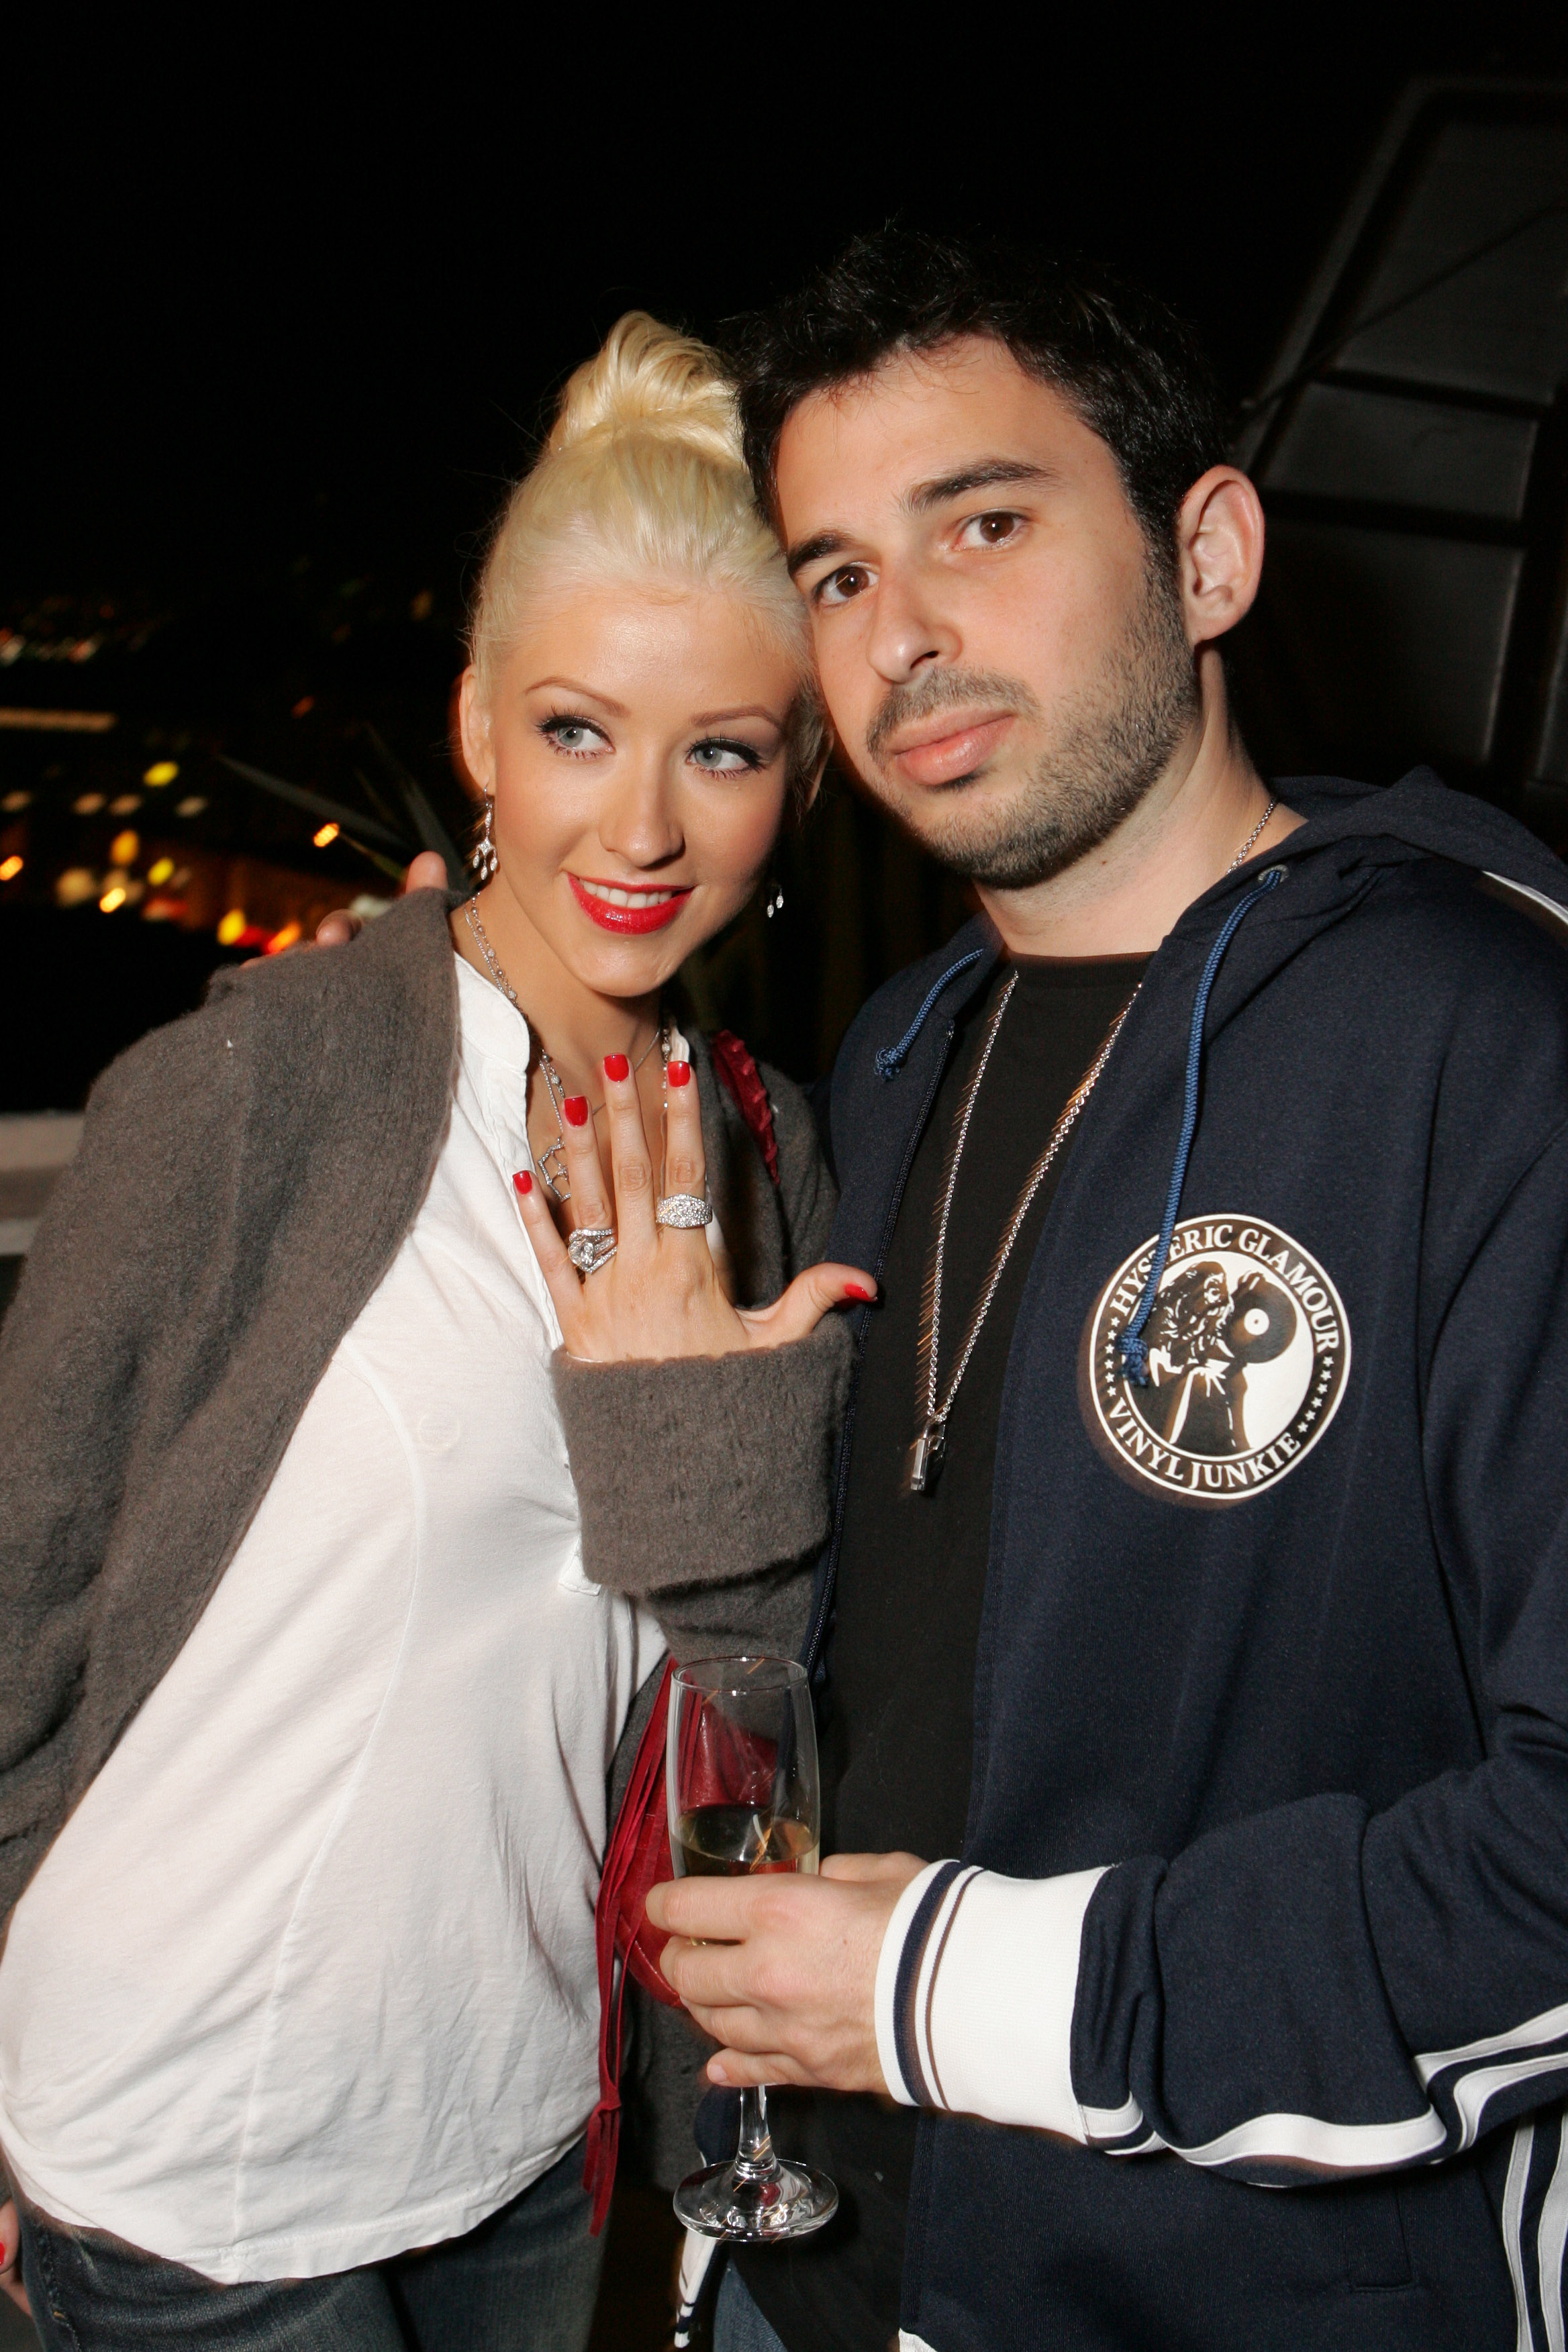 Christina Aguilera and Jordan Bratman during Veuve Clicquot Vintage 1998 Sponsors the US Launch of Stephen Webster's "Femme Fatale" Diamond Collection at Chateau Marmont on December 9, 2005 in Hollywood, California. | Source: Getty Images